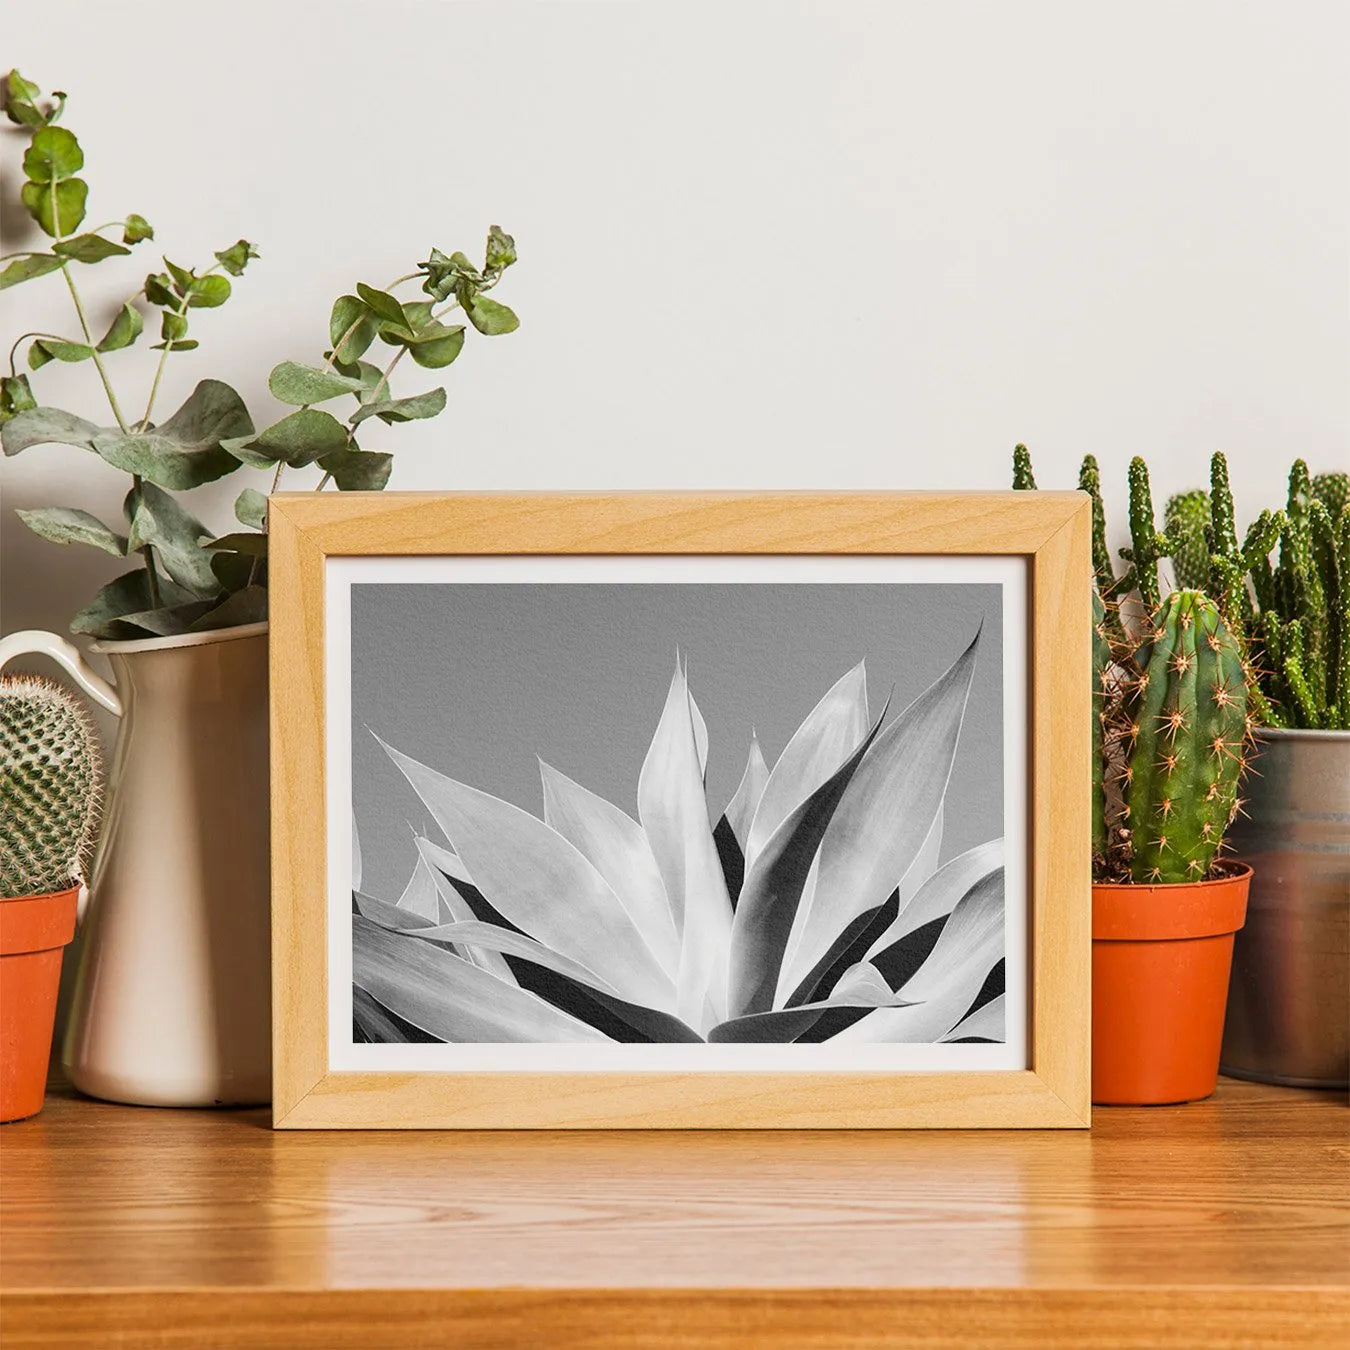 In Bloom - Succulent Black And White Wall Art - 8×10 - Posters Prints & Visual Artwork - Aesthetic Art